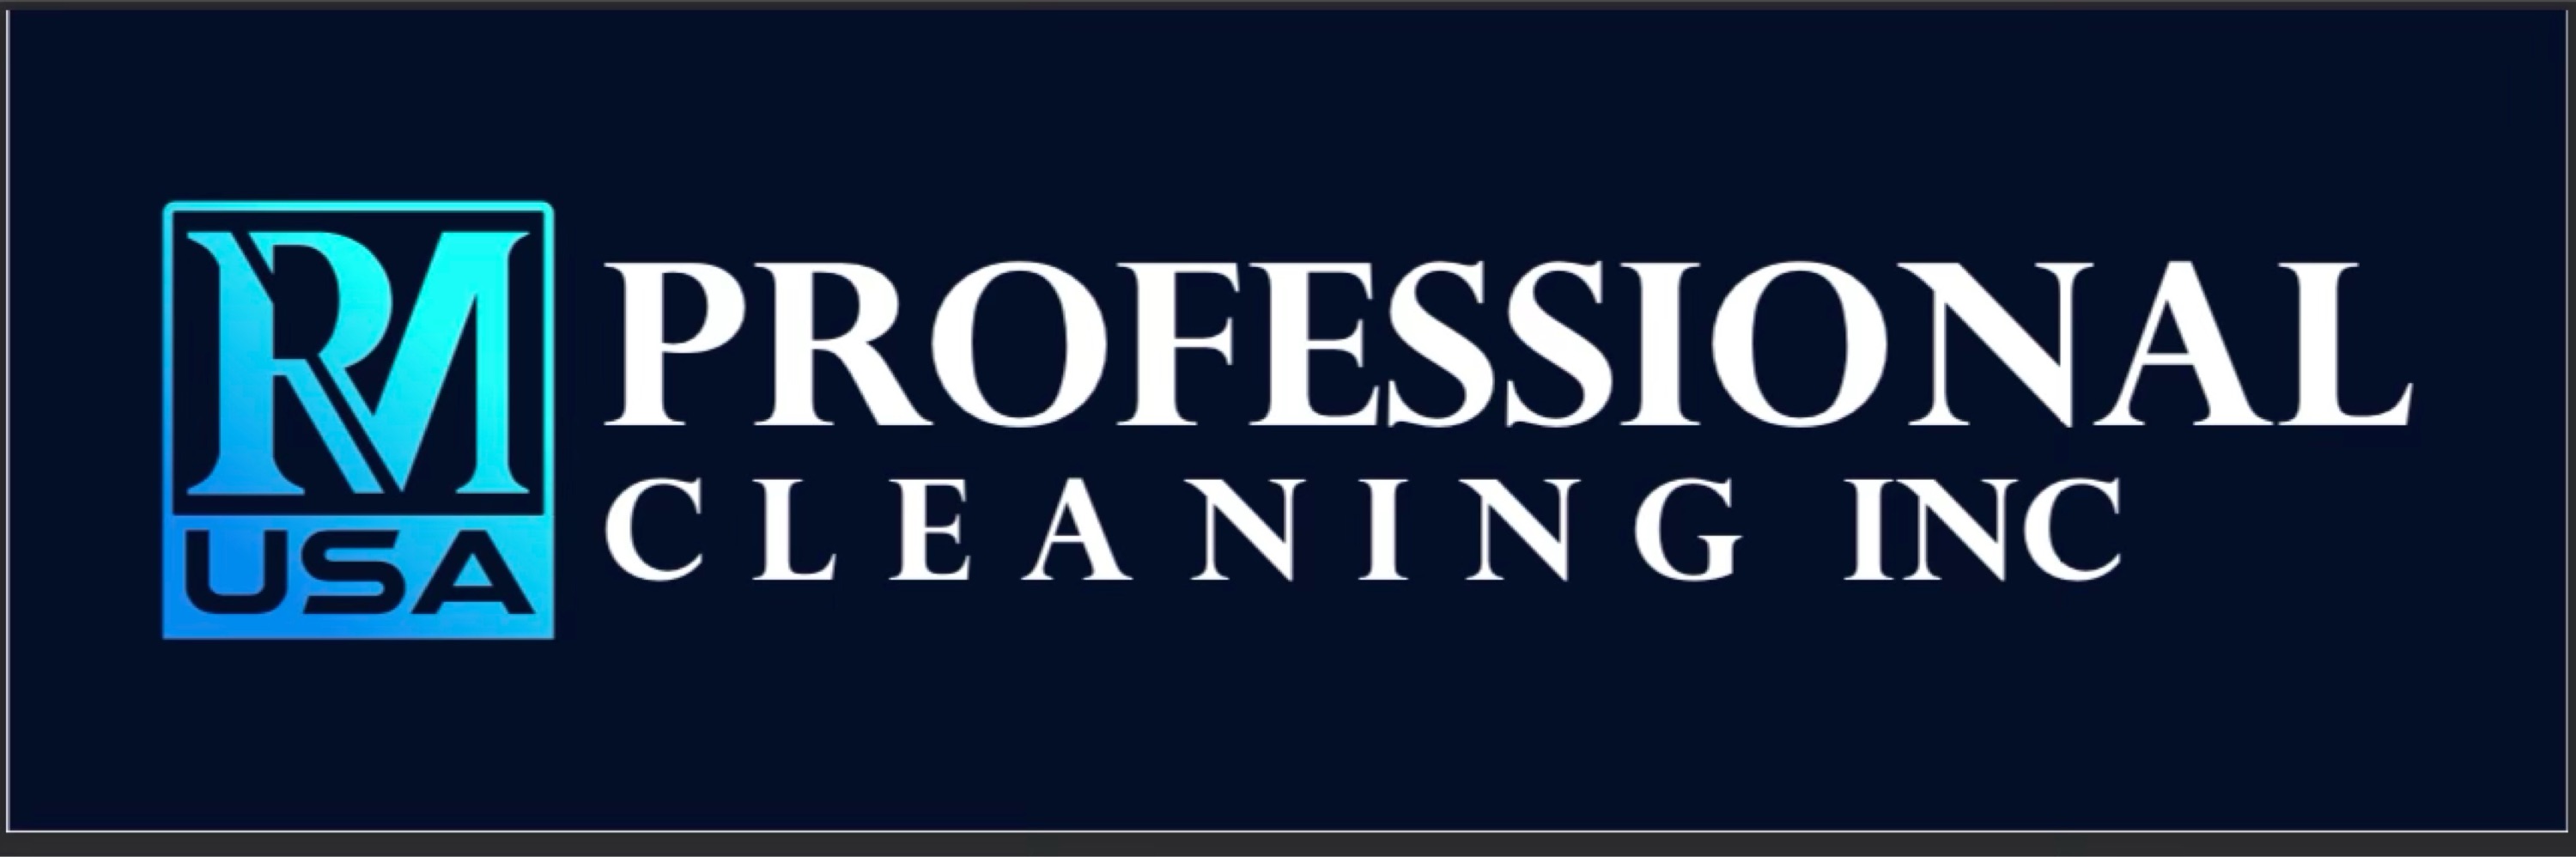 RM USA PROFESSIONAL CLEANING INC Logo